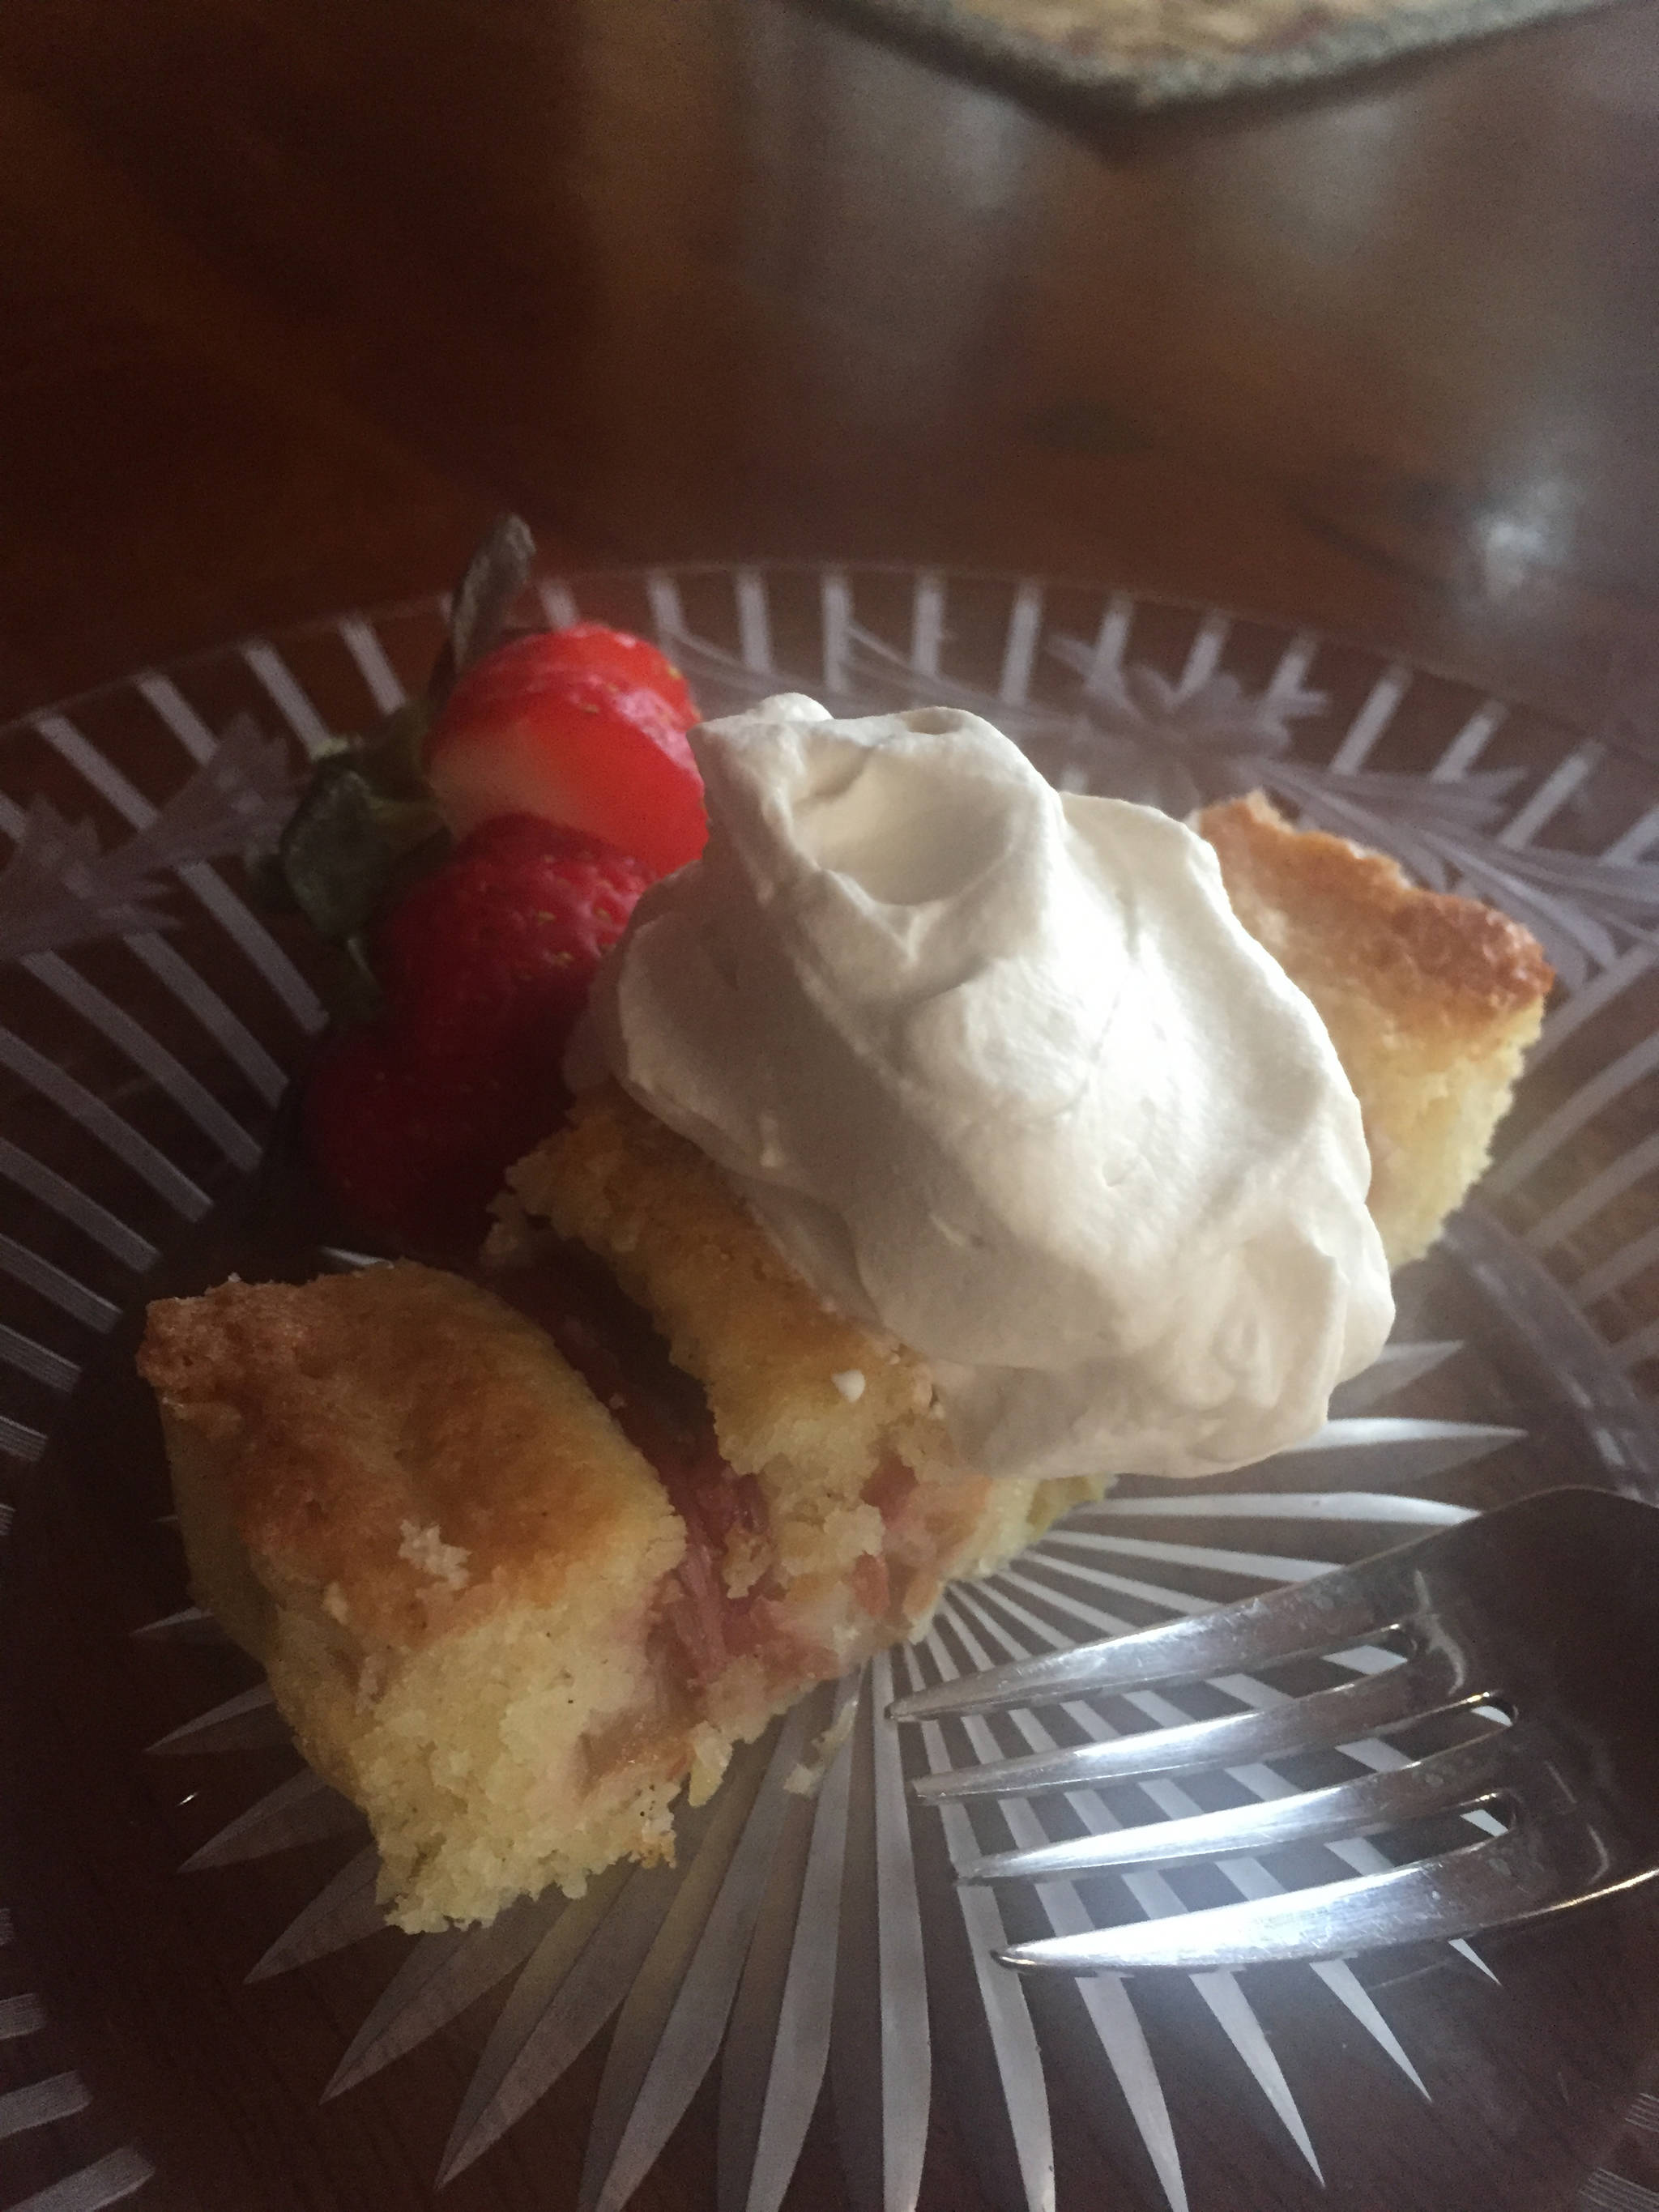 With rhubarb now growing, Teri Robl’s rhubarb almond cake makes good use of the Alaska early-spring staple, as seen here in this photo of the cake taken in her Homer, Alaska, kitchen on May 12, 2019. (Photo by Teri Robl)